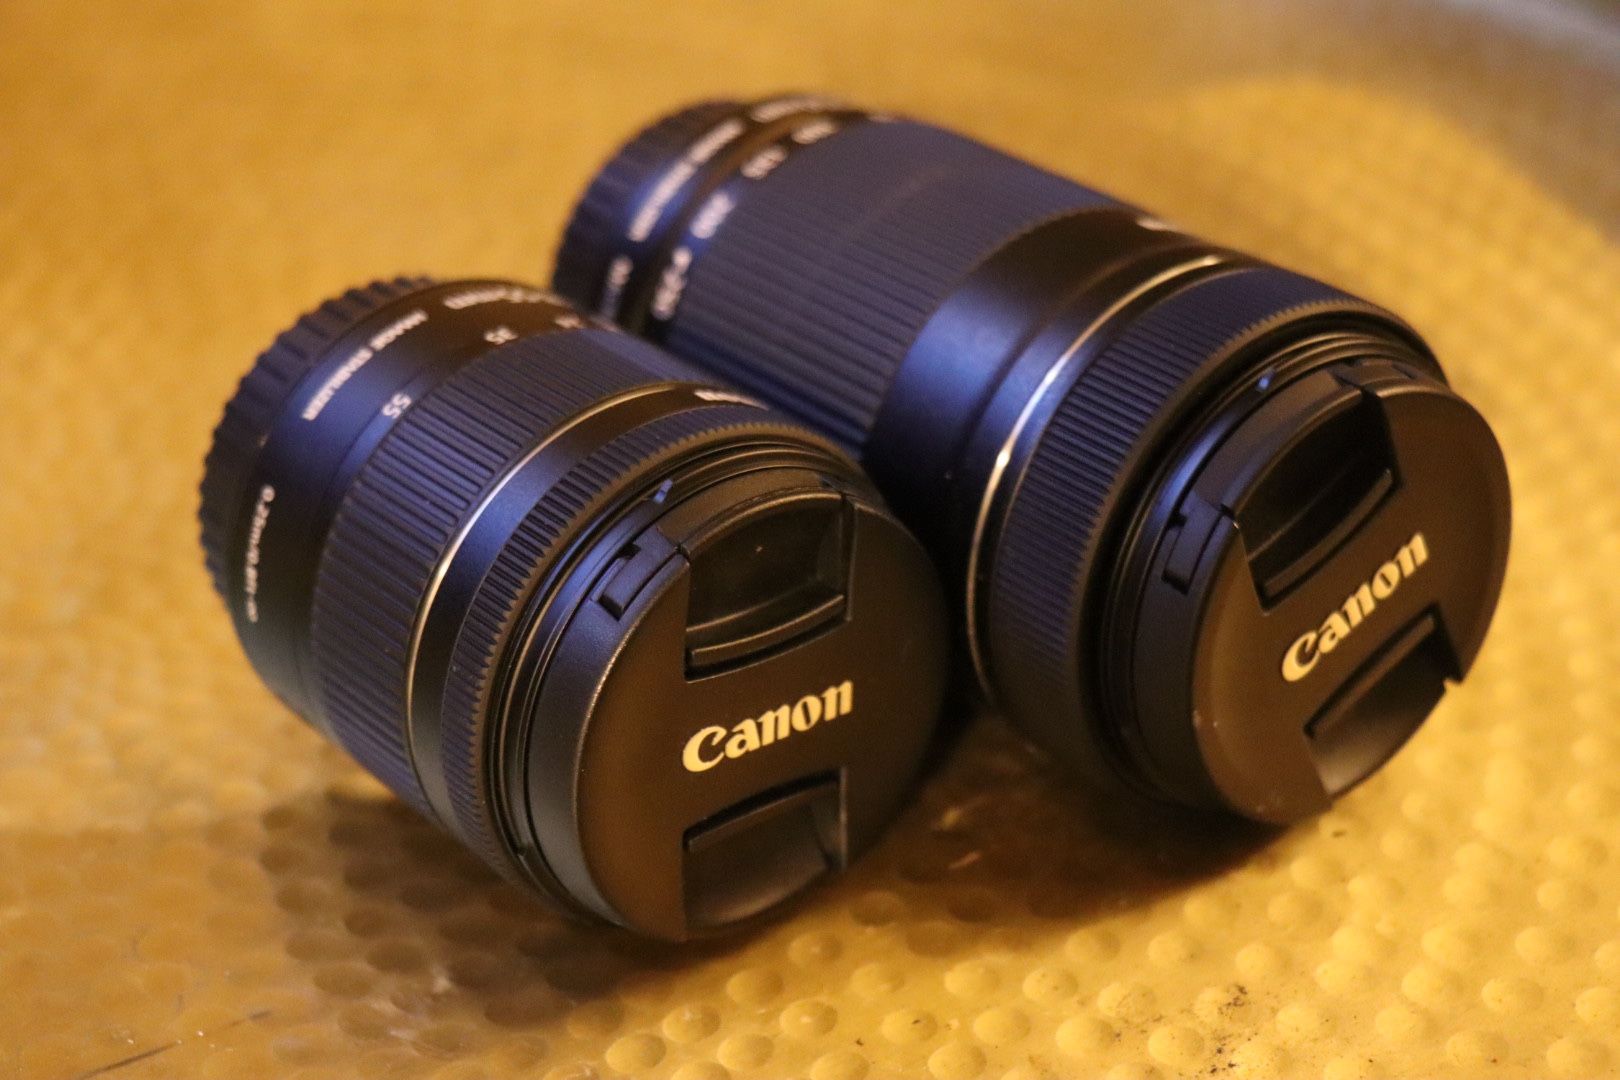 Cannon EFS 55-250mm & 18-55mm lens with accessories!